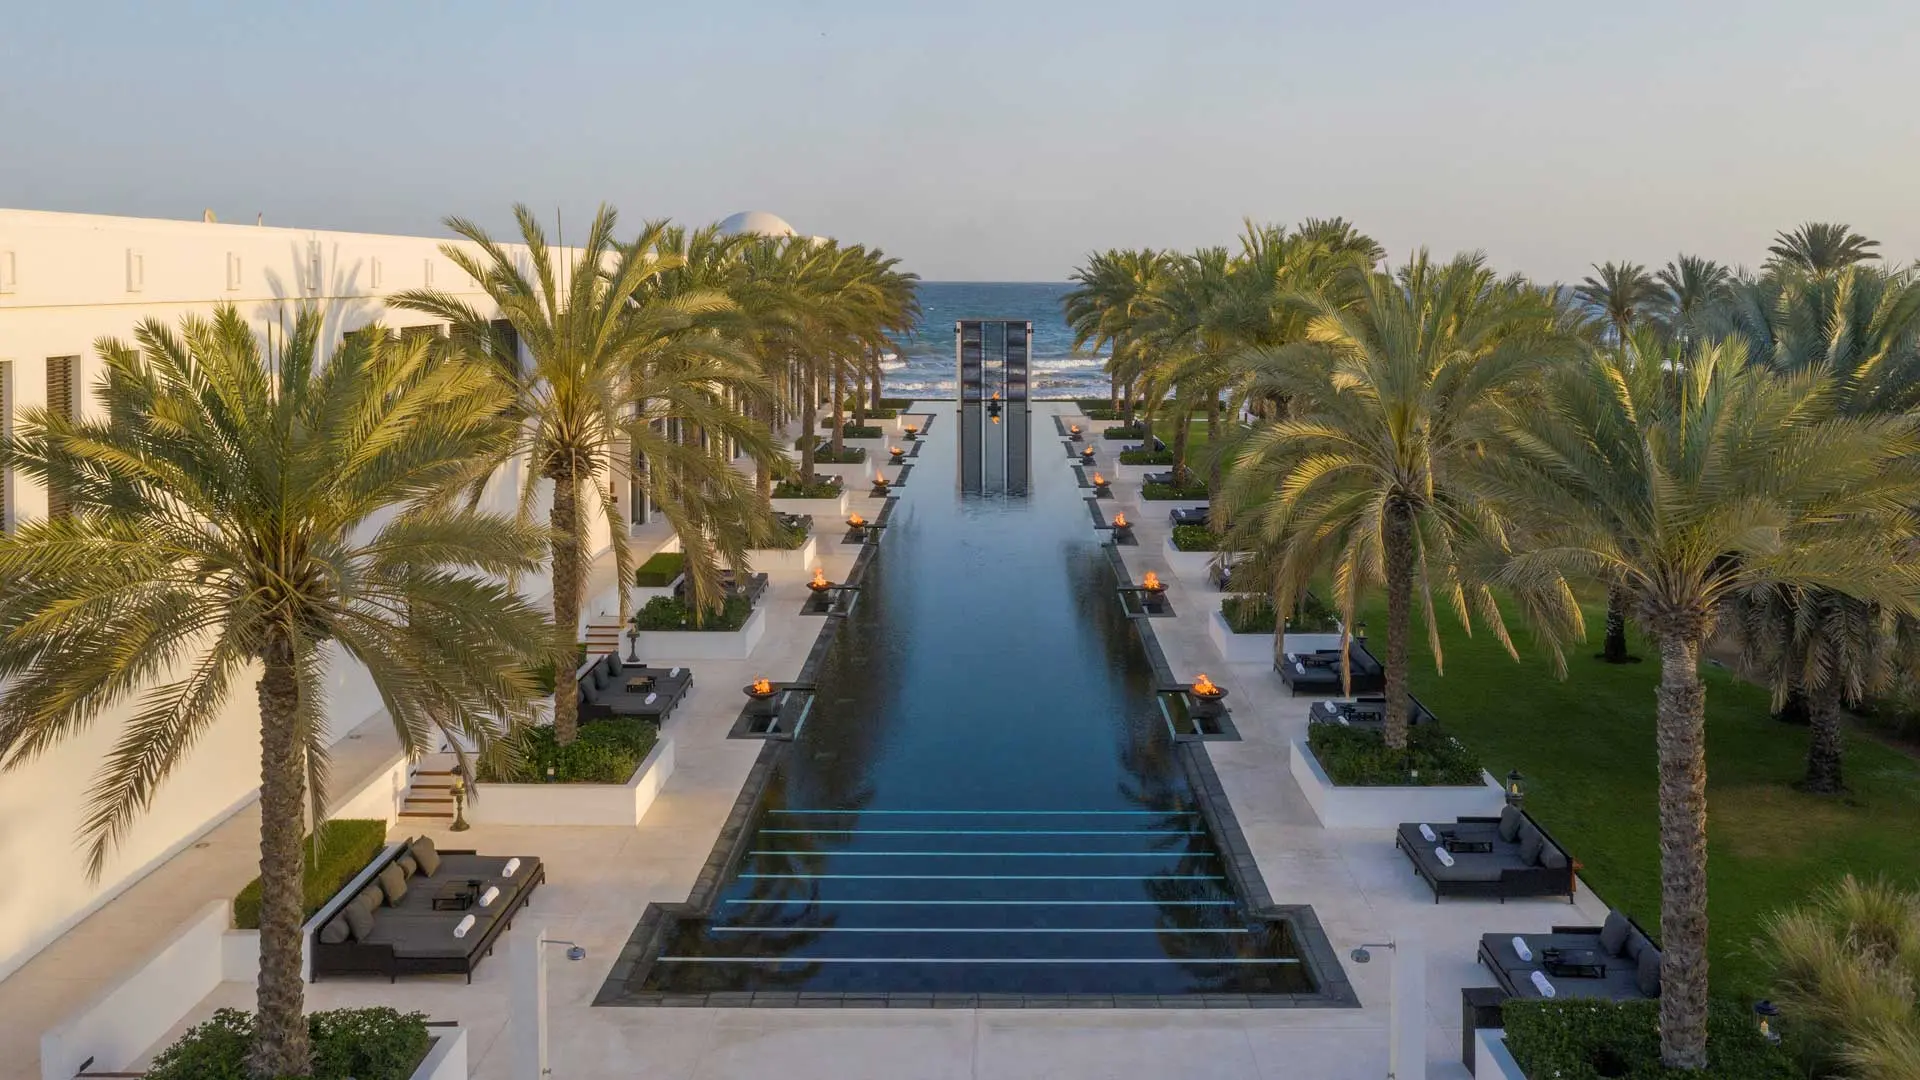 Hotel review What We Love' - The Chedi Muscat - 2